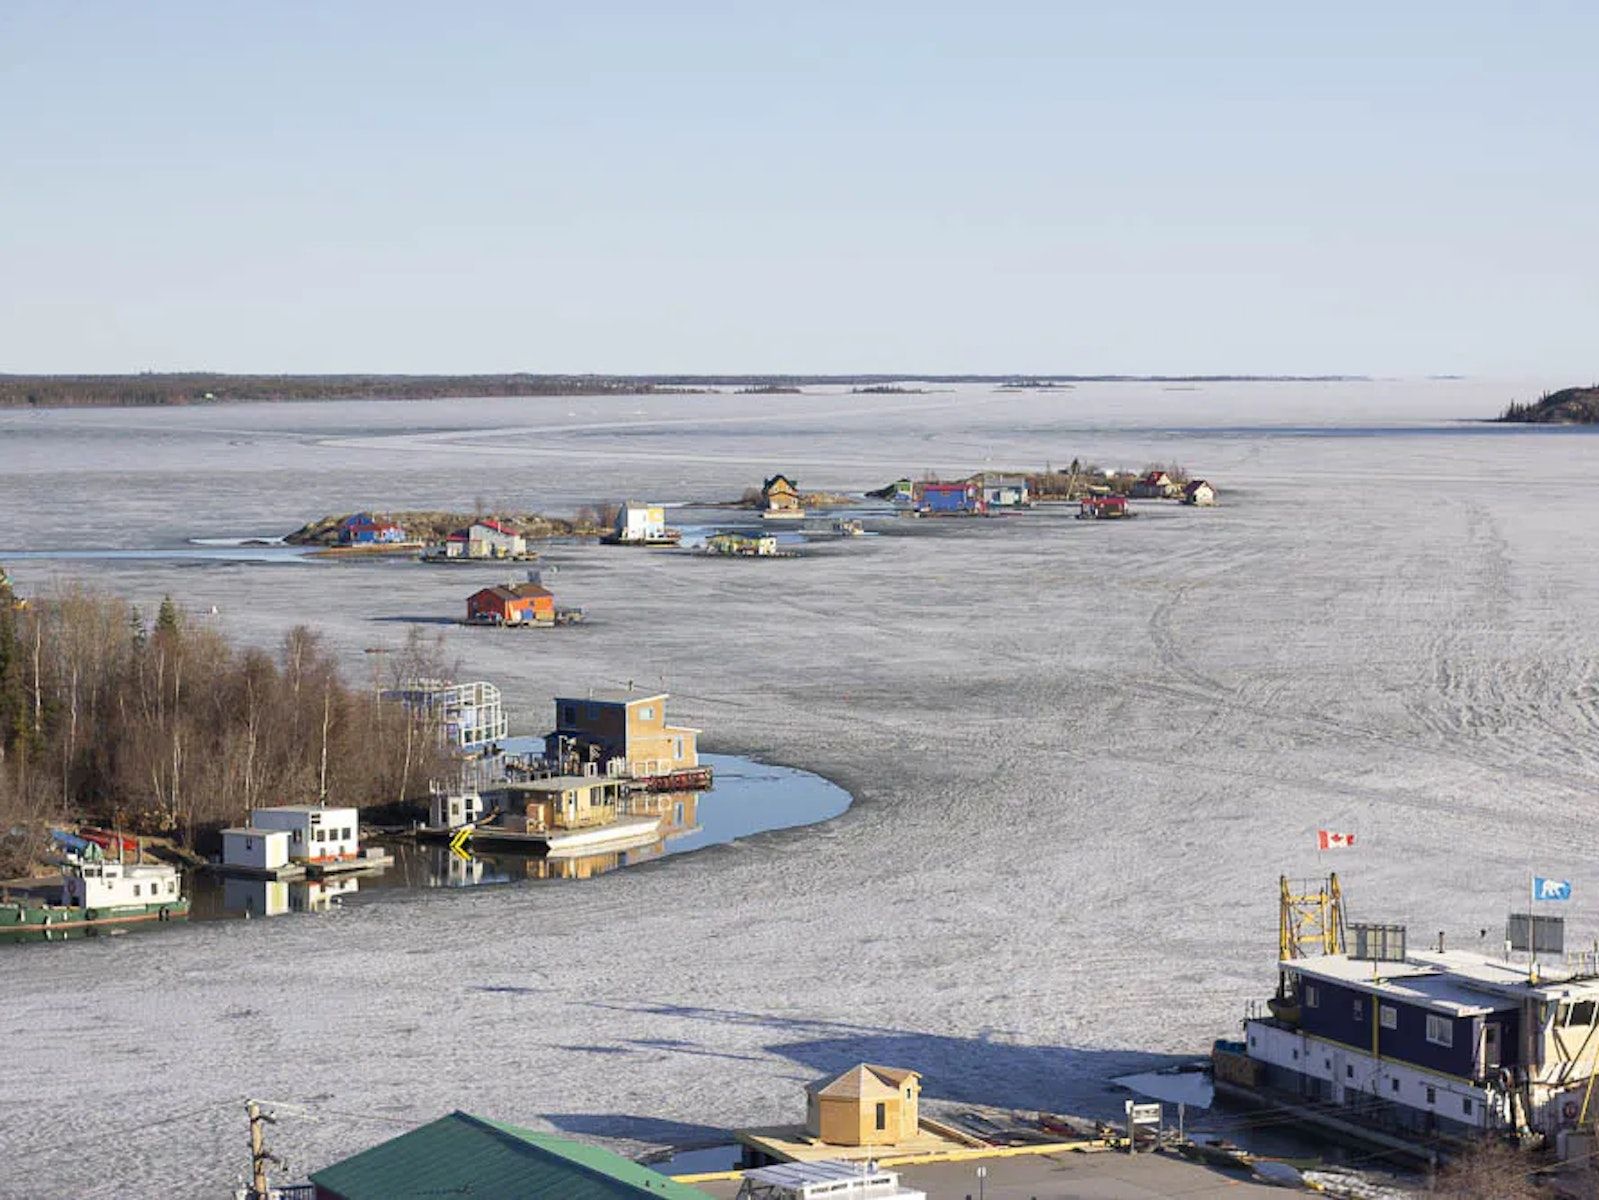 Houseboats frozen in the lake in Yellowknife